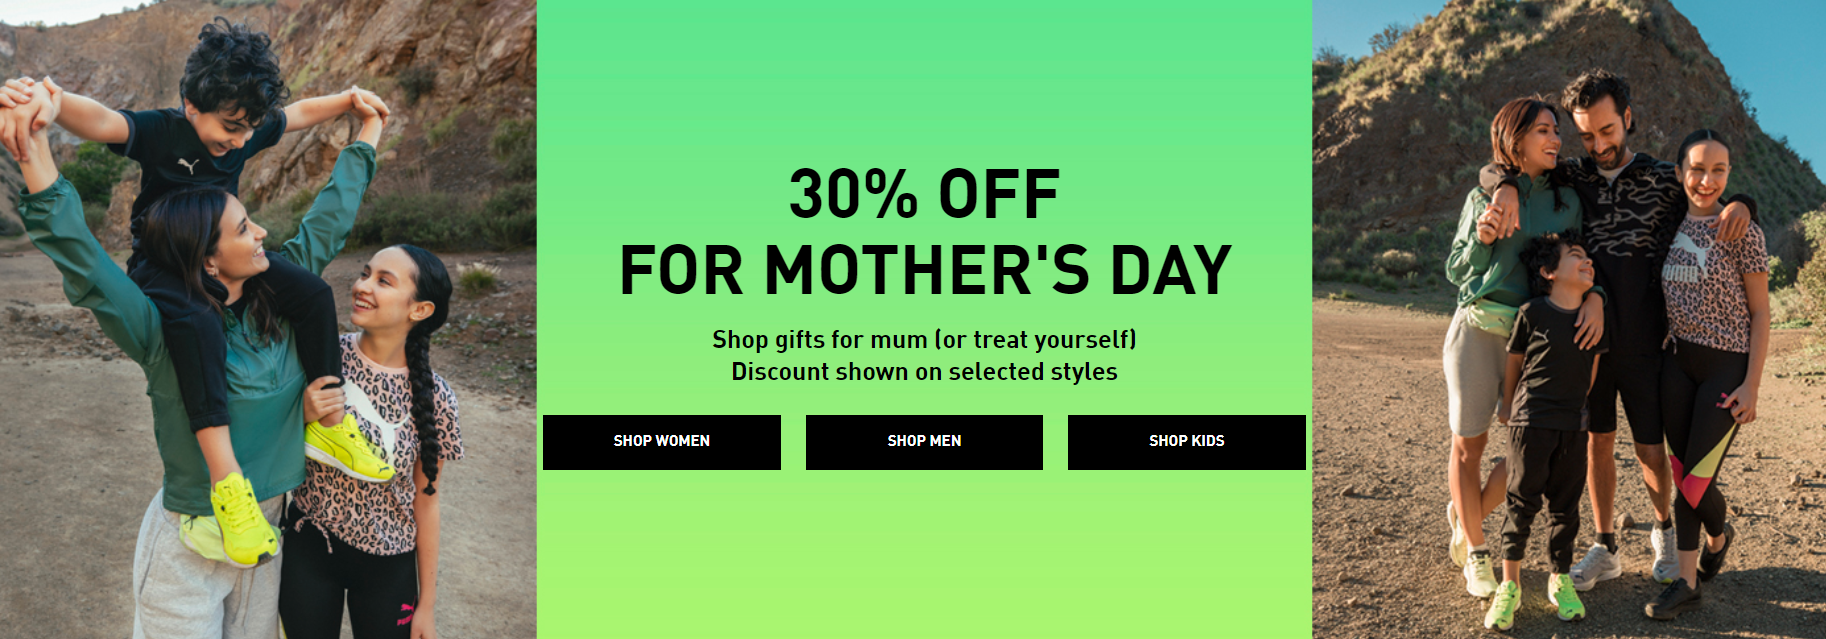 Puma Mother's Day - 30% OFF on selected styles